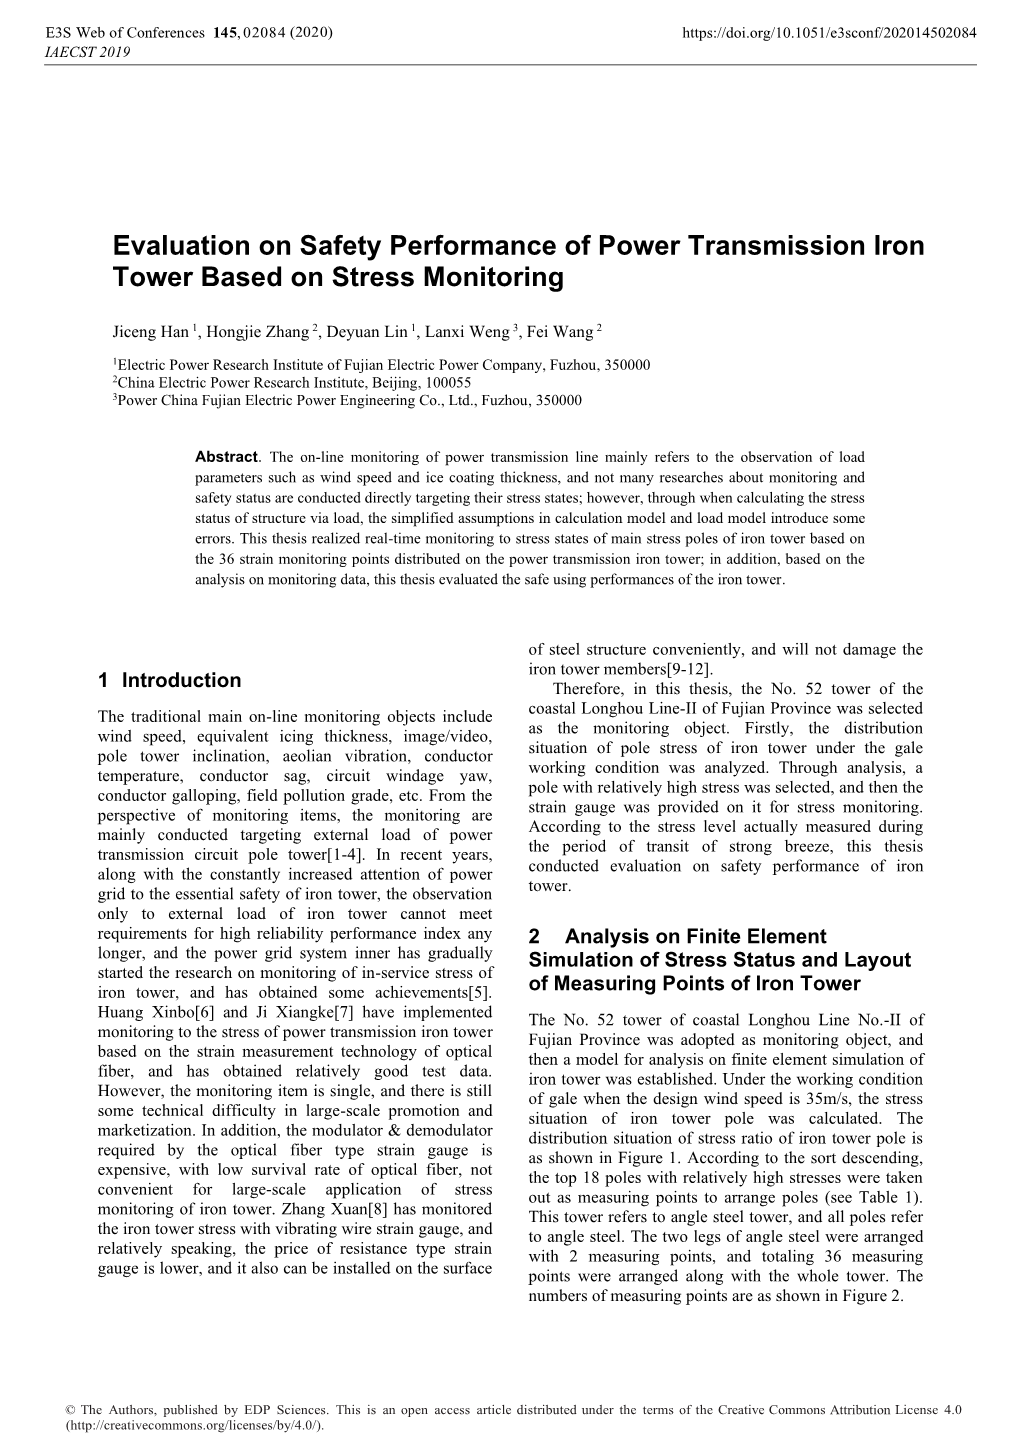 Evaluation on Safety Performance of Power Transmission Iron Tower Based on Stress Monitoring